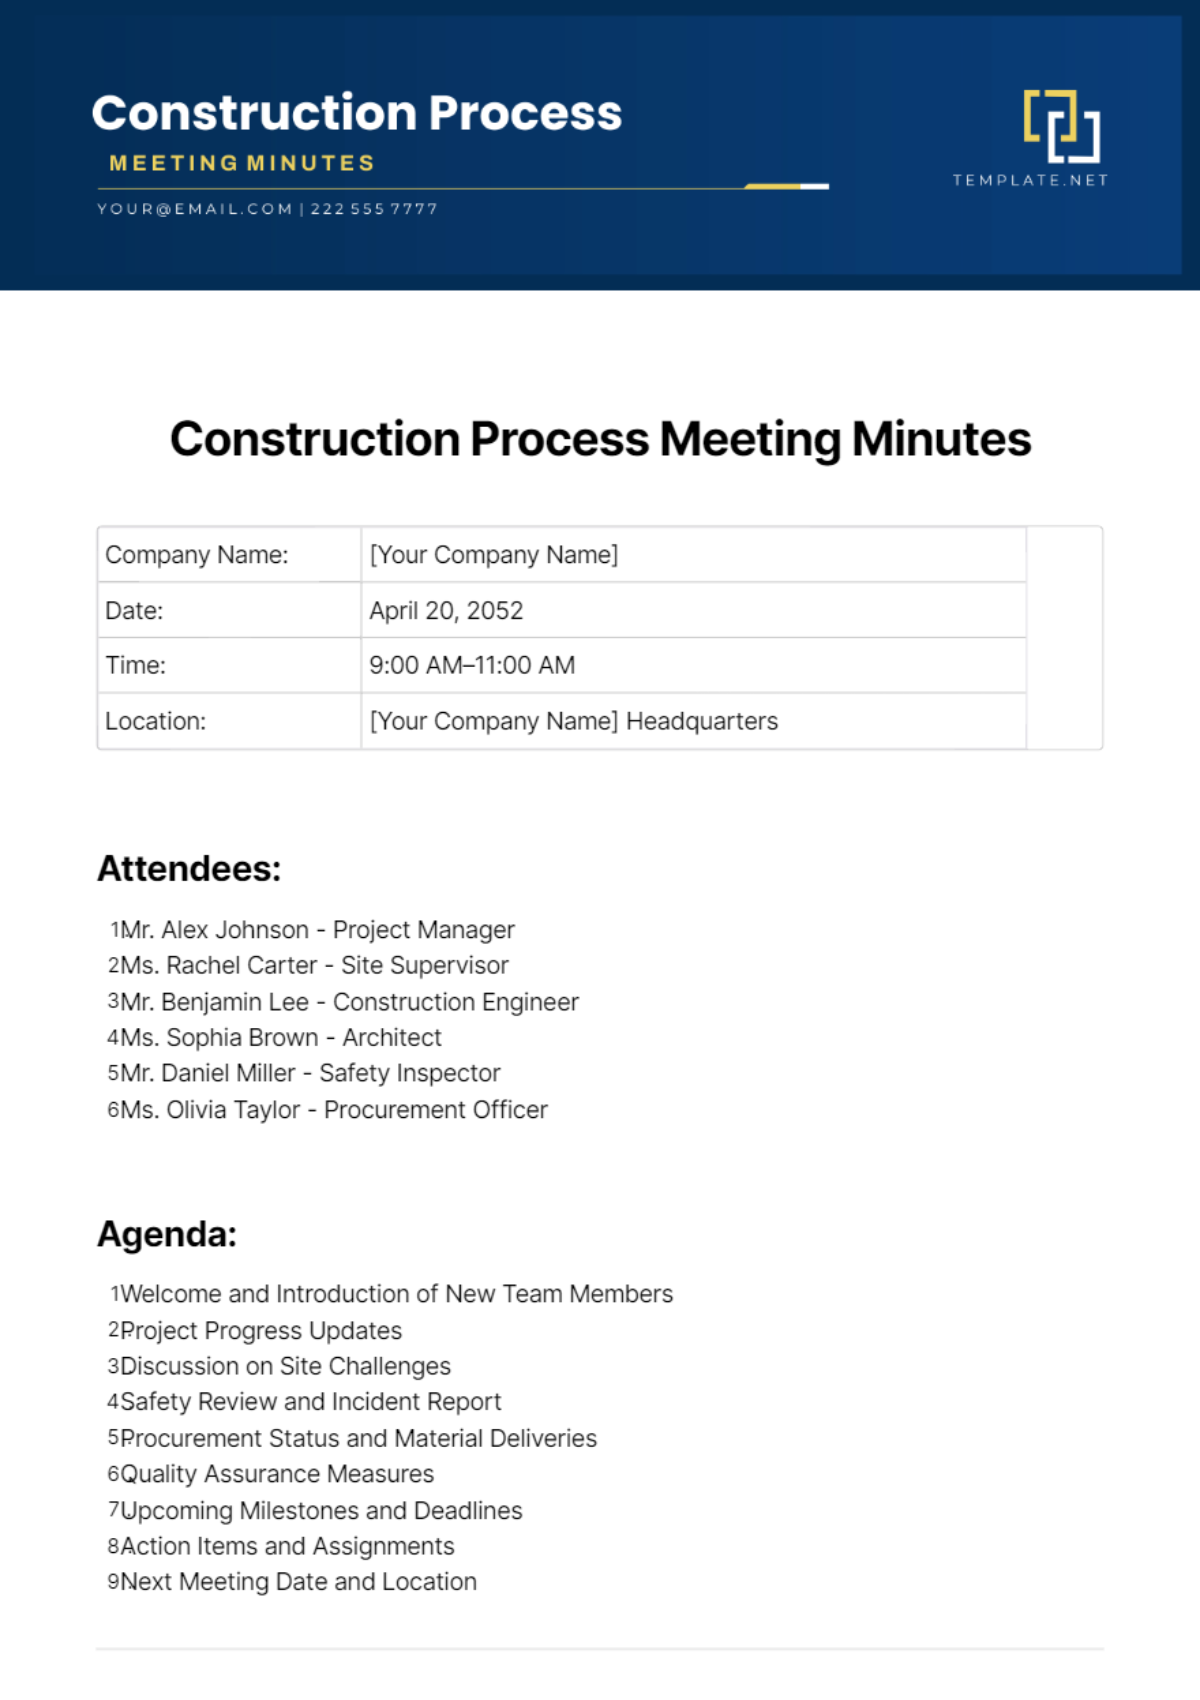 Construction Process Meeting Minutes Template